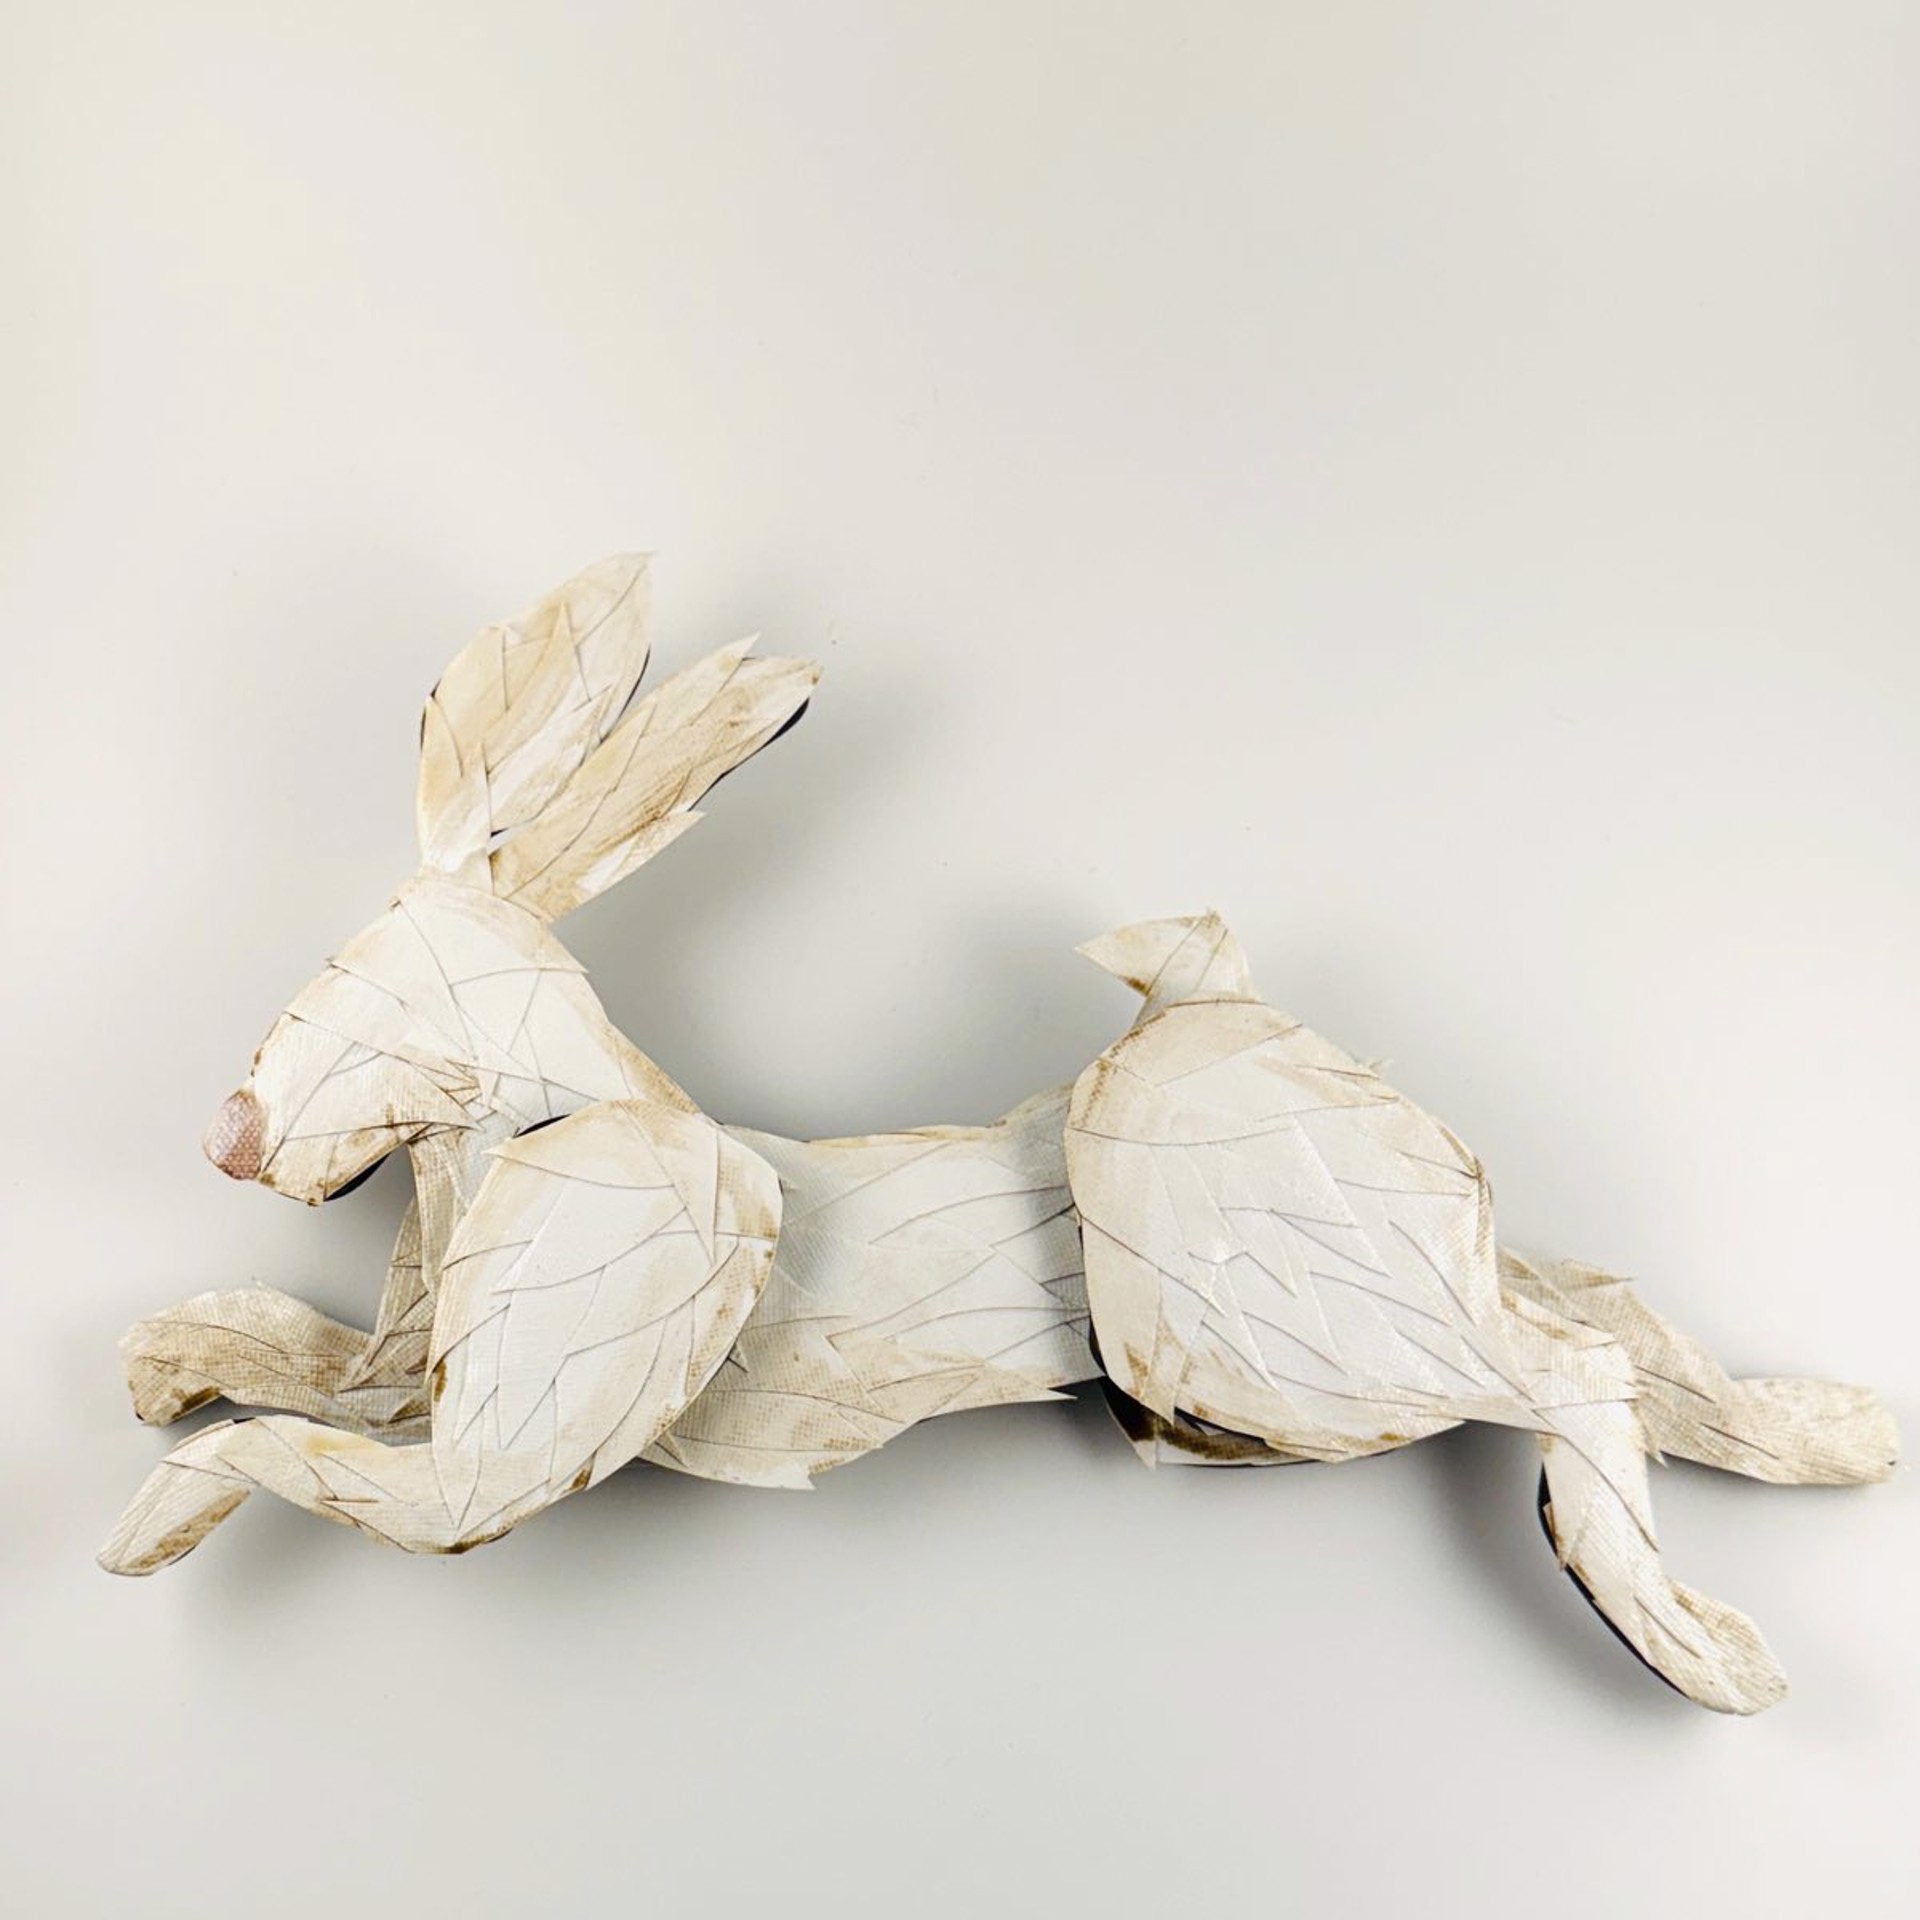 3D Hopping Bunny Wall Sculpture RC23-10 by Robin Cooper